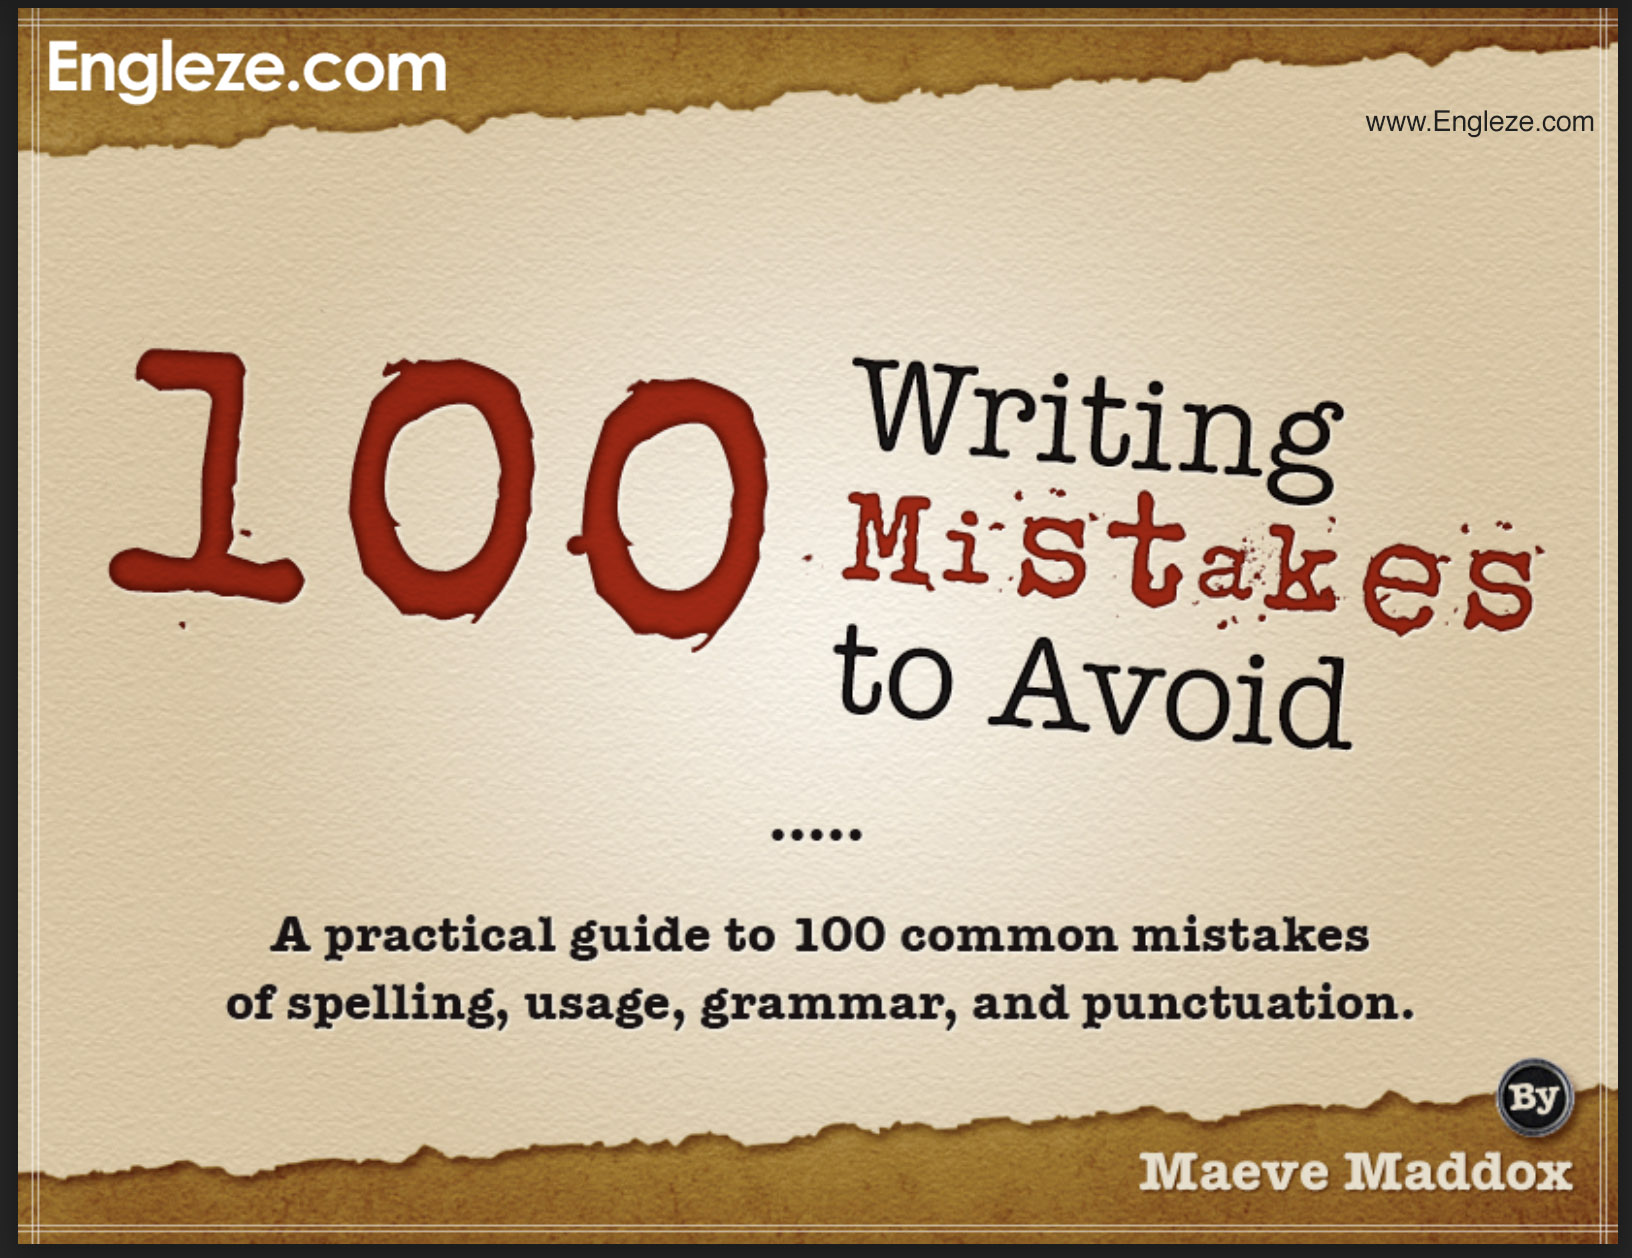 100 Writing mistakes to avoid in English Published by Engleze.com